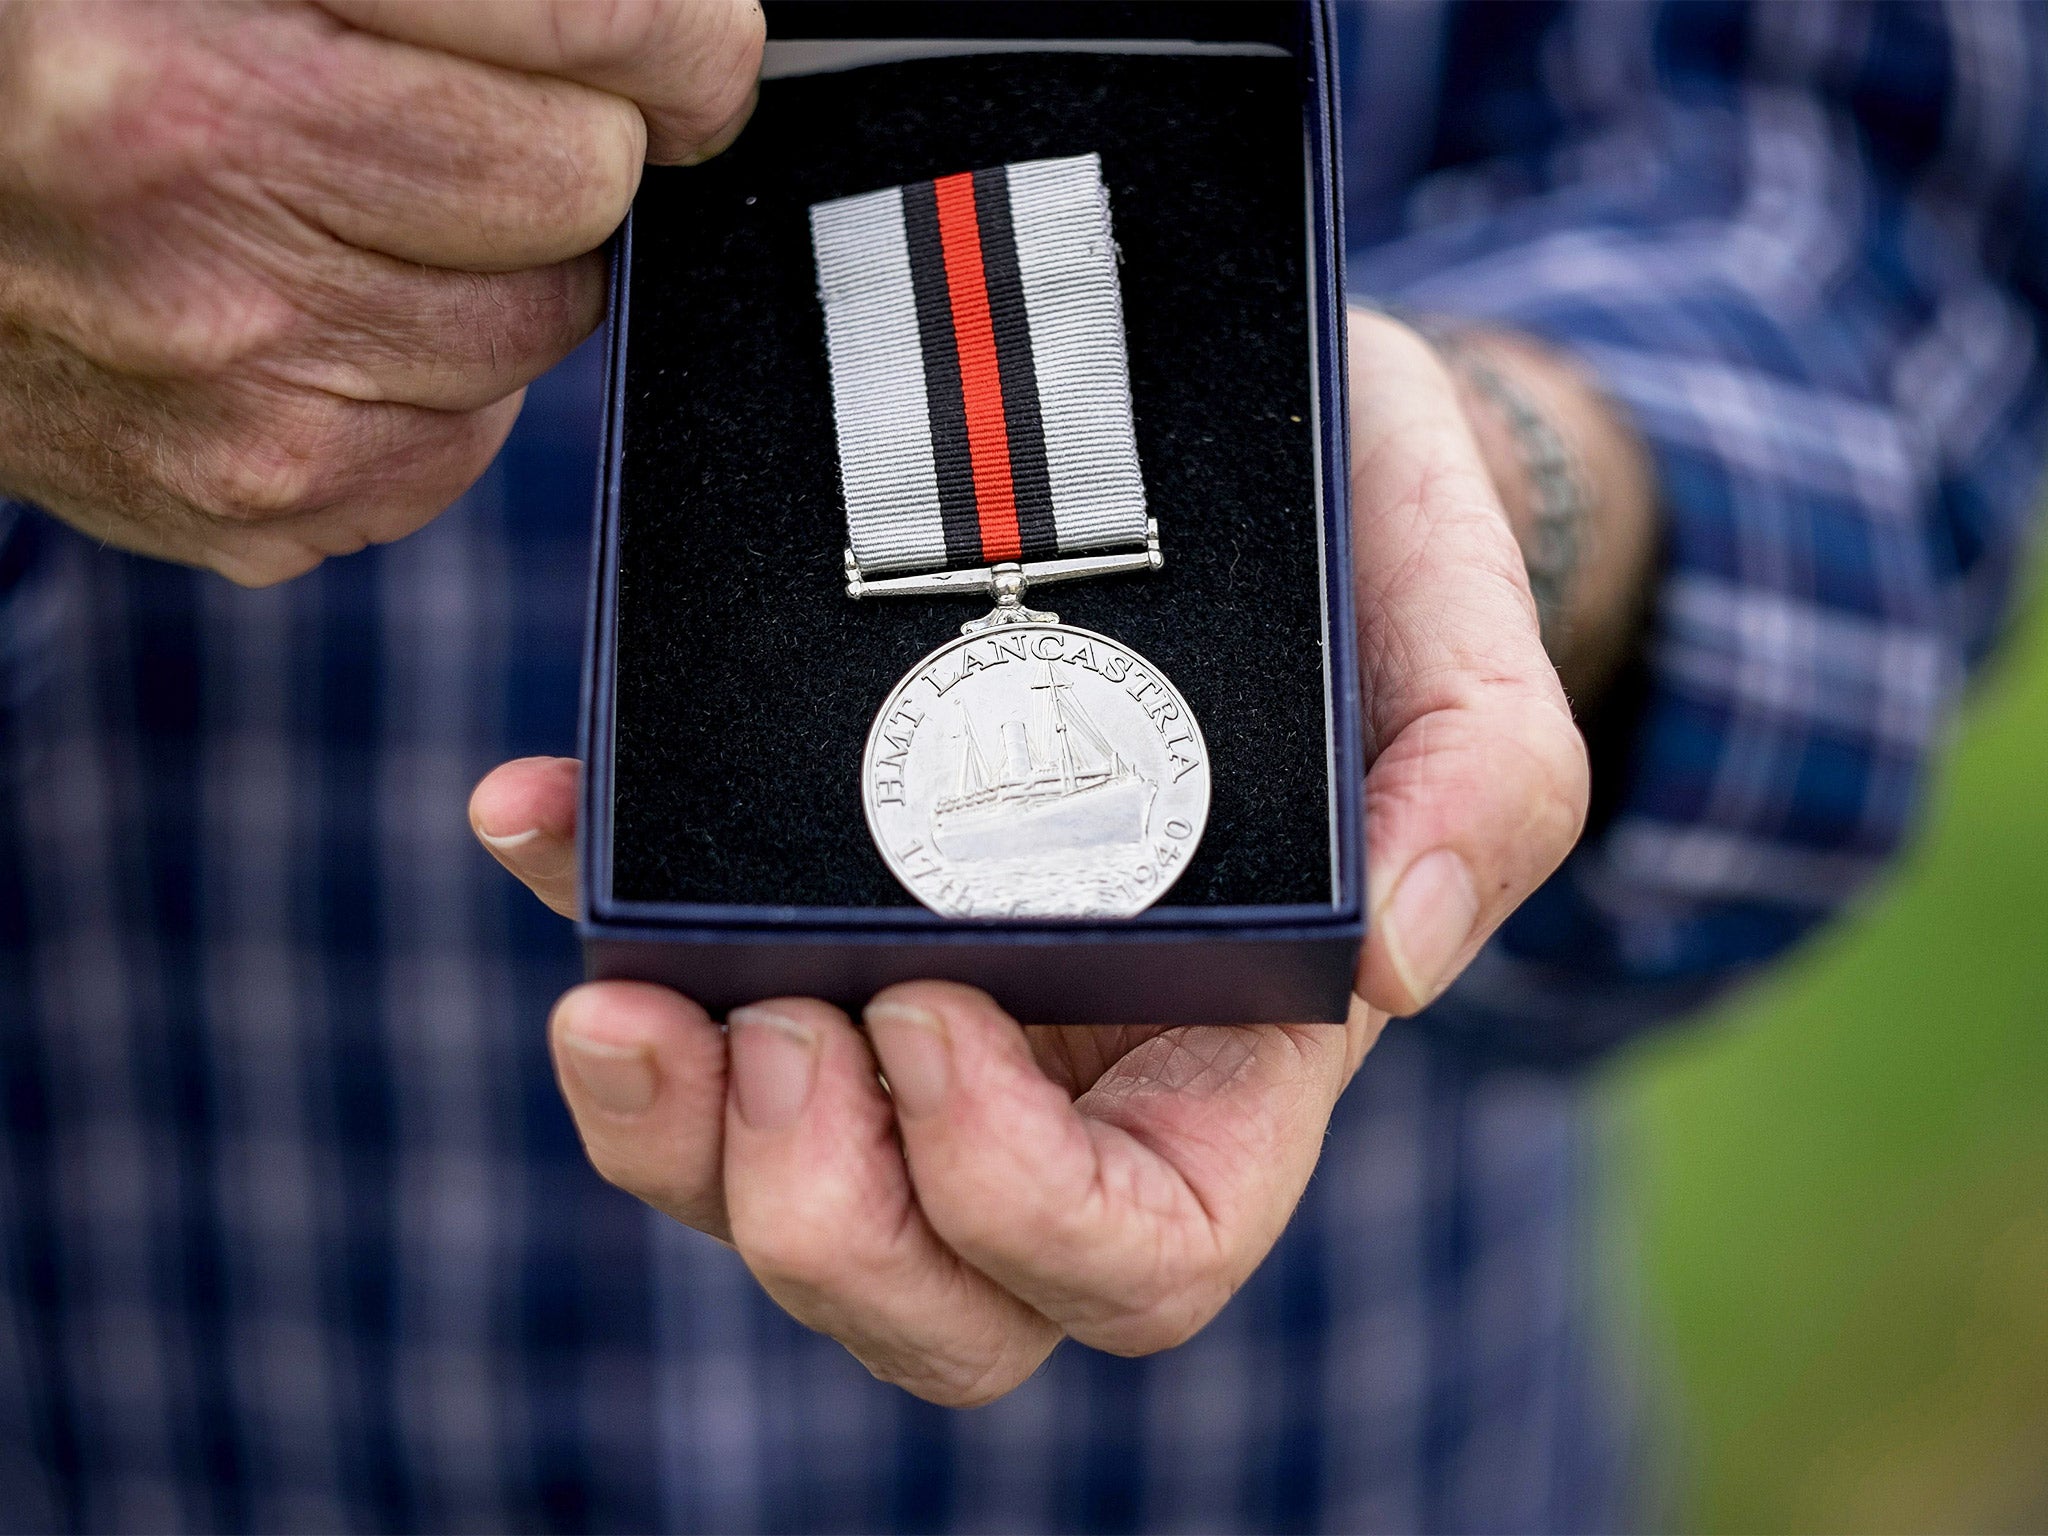 Tony Buss, 75, holds his father’s ‘HMT Lancastria’ medal